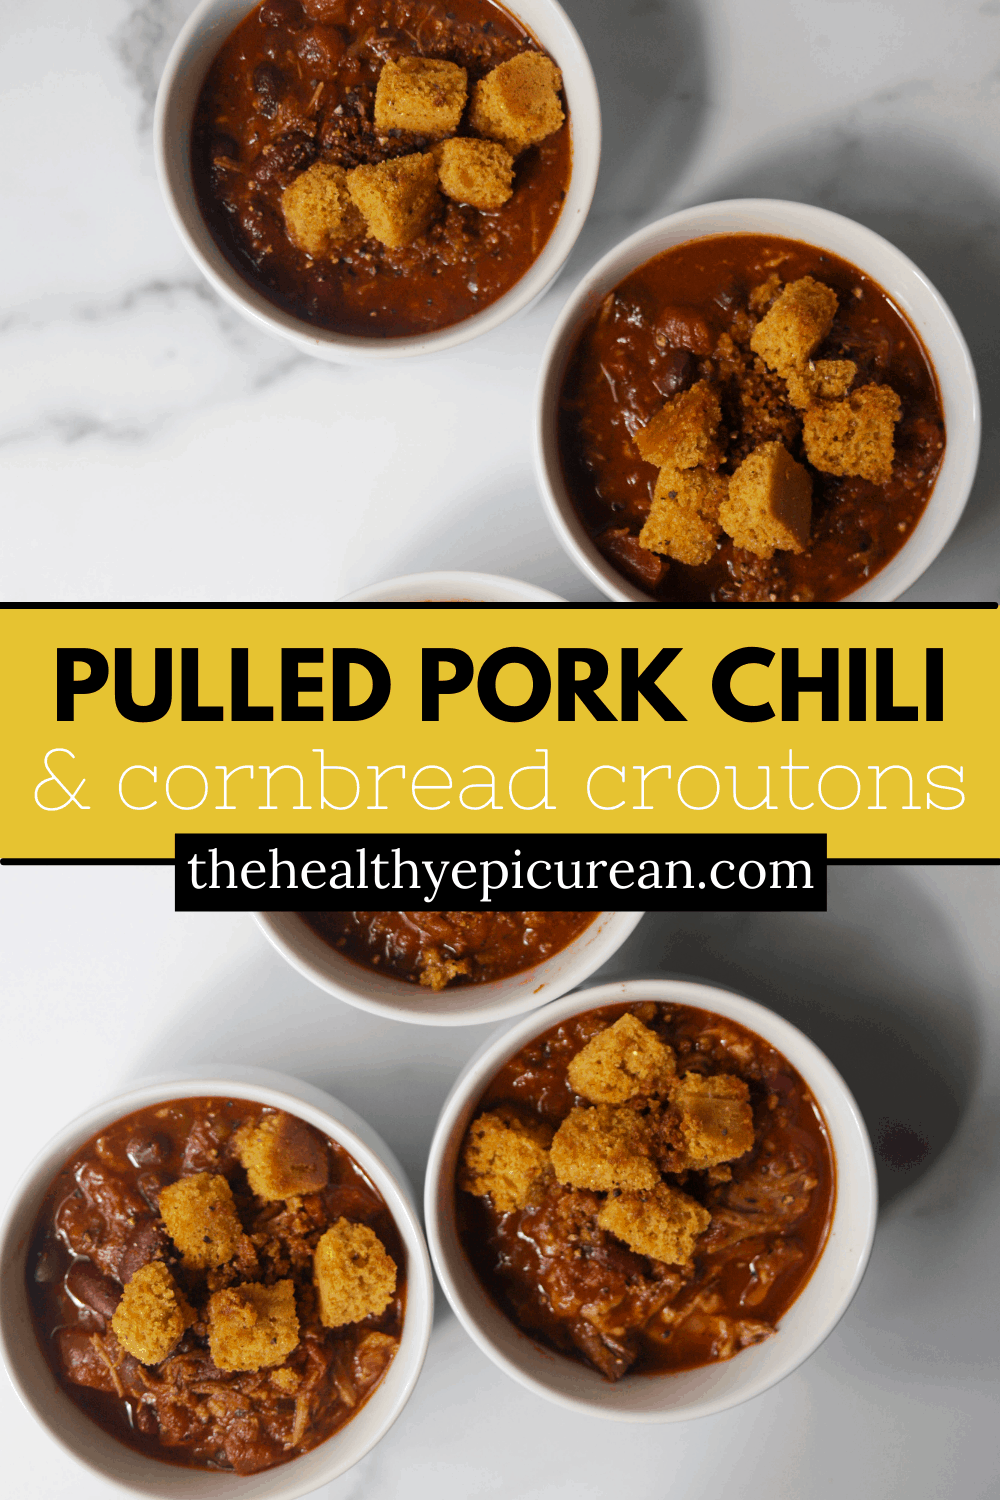 Pulled Pork Chili with Cornbread Croutons - The Healthy Epicurean